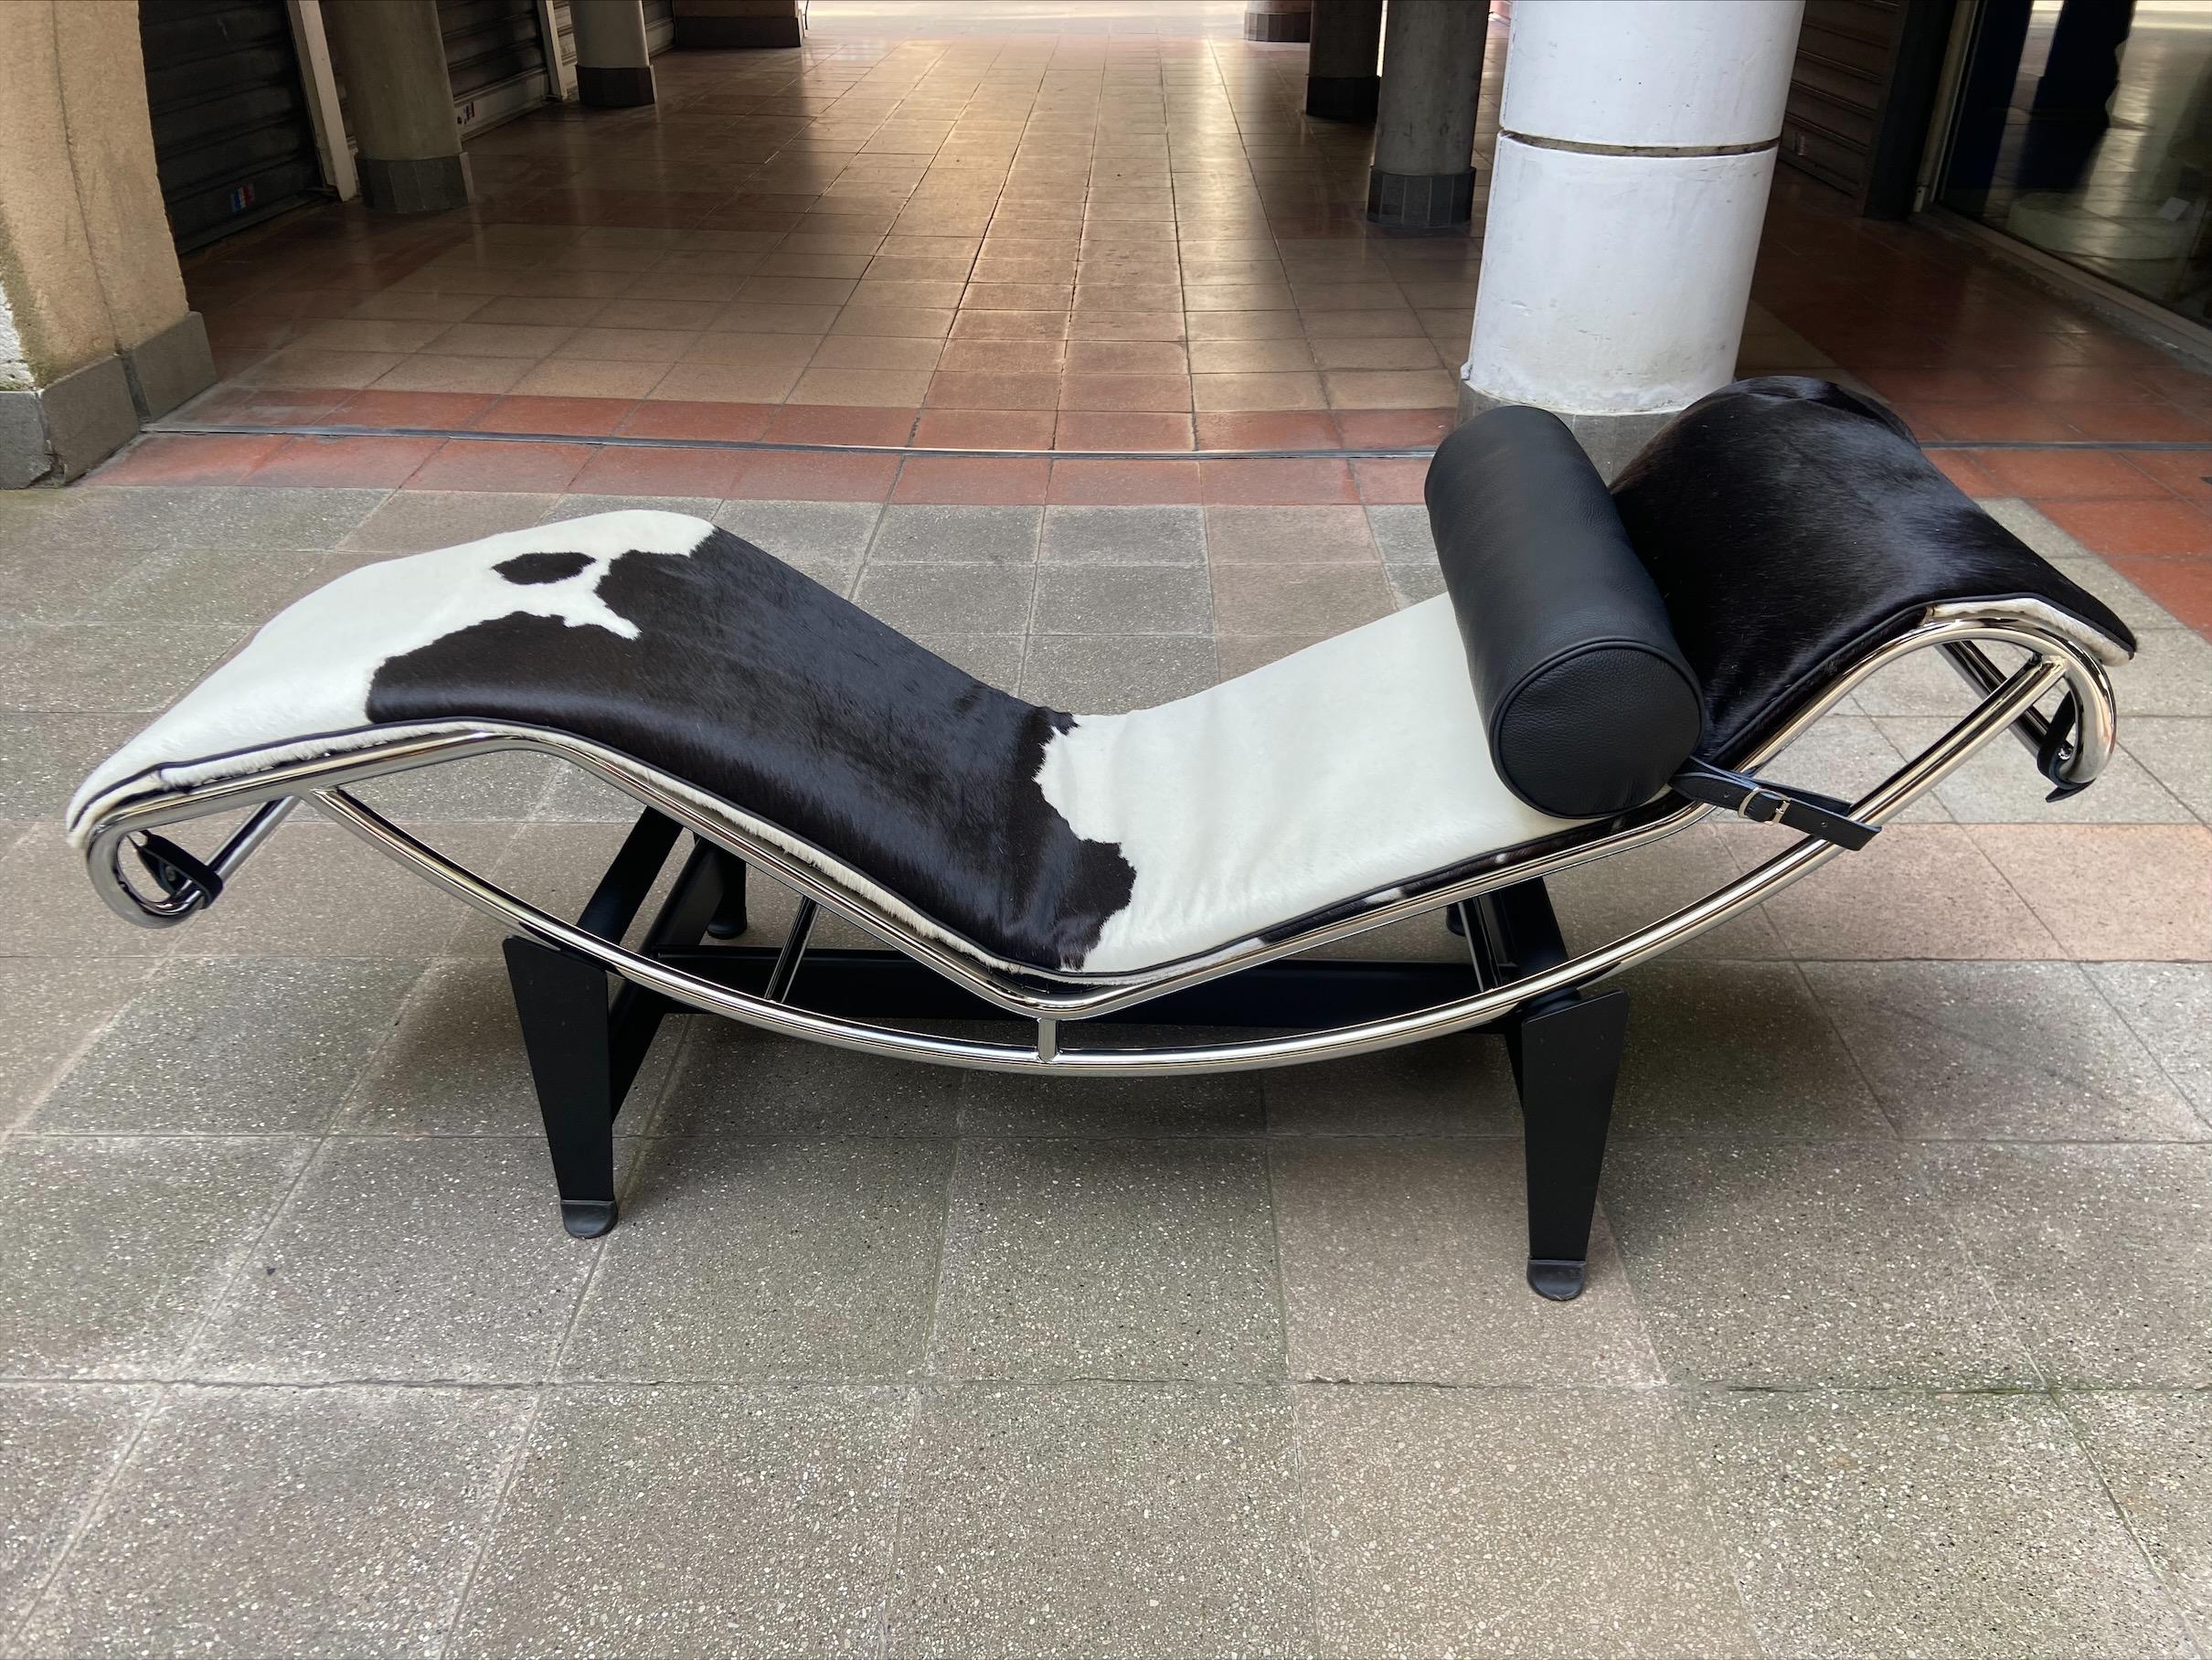 LC4 Pony lounge chair black and white 3 - Le Corbusier and Charlotte Perriand
Edition Cassina
Circa 2016
In perfect condition
Signature and engraved numbering
Cassina certificate
Black and white cowhide, black grained leather cushion
Chromed